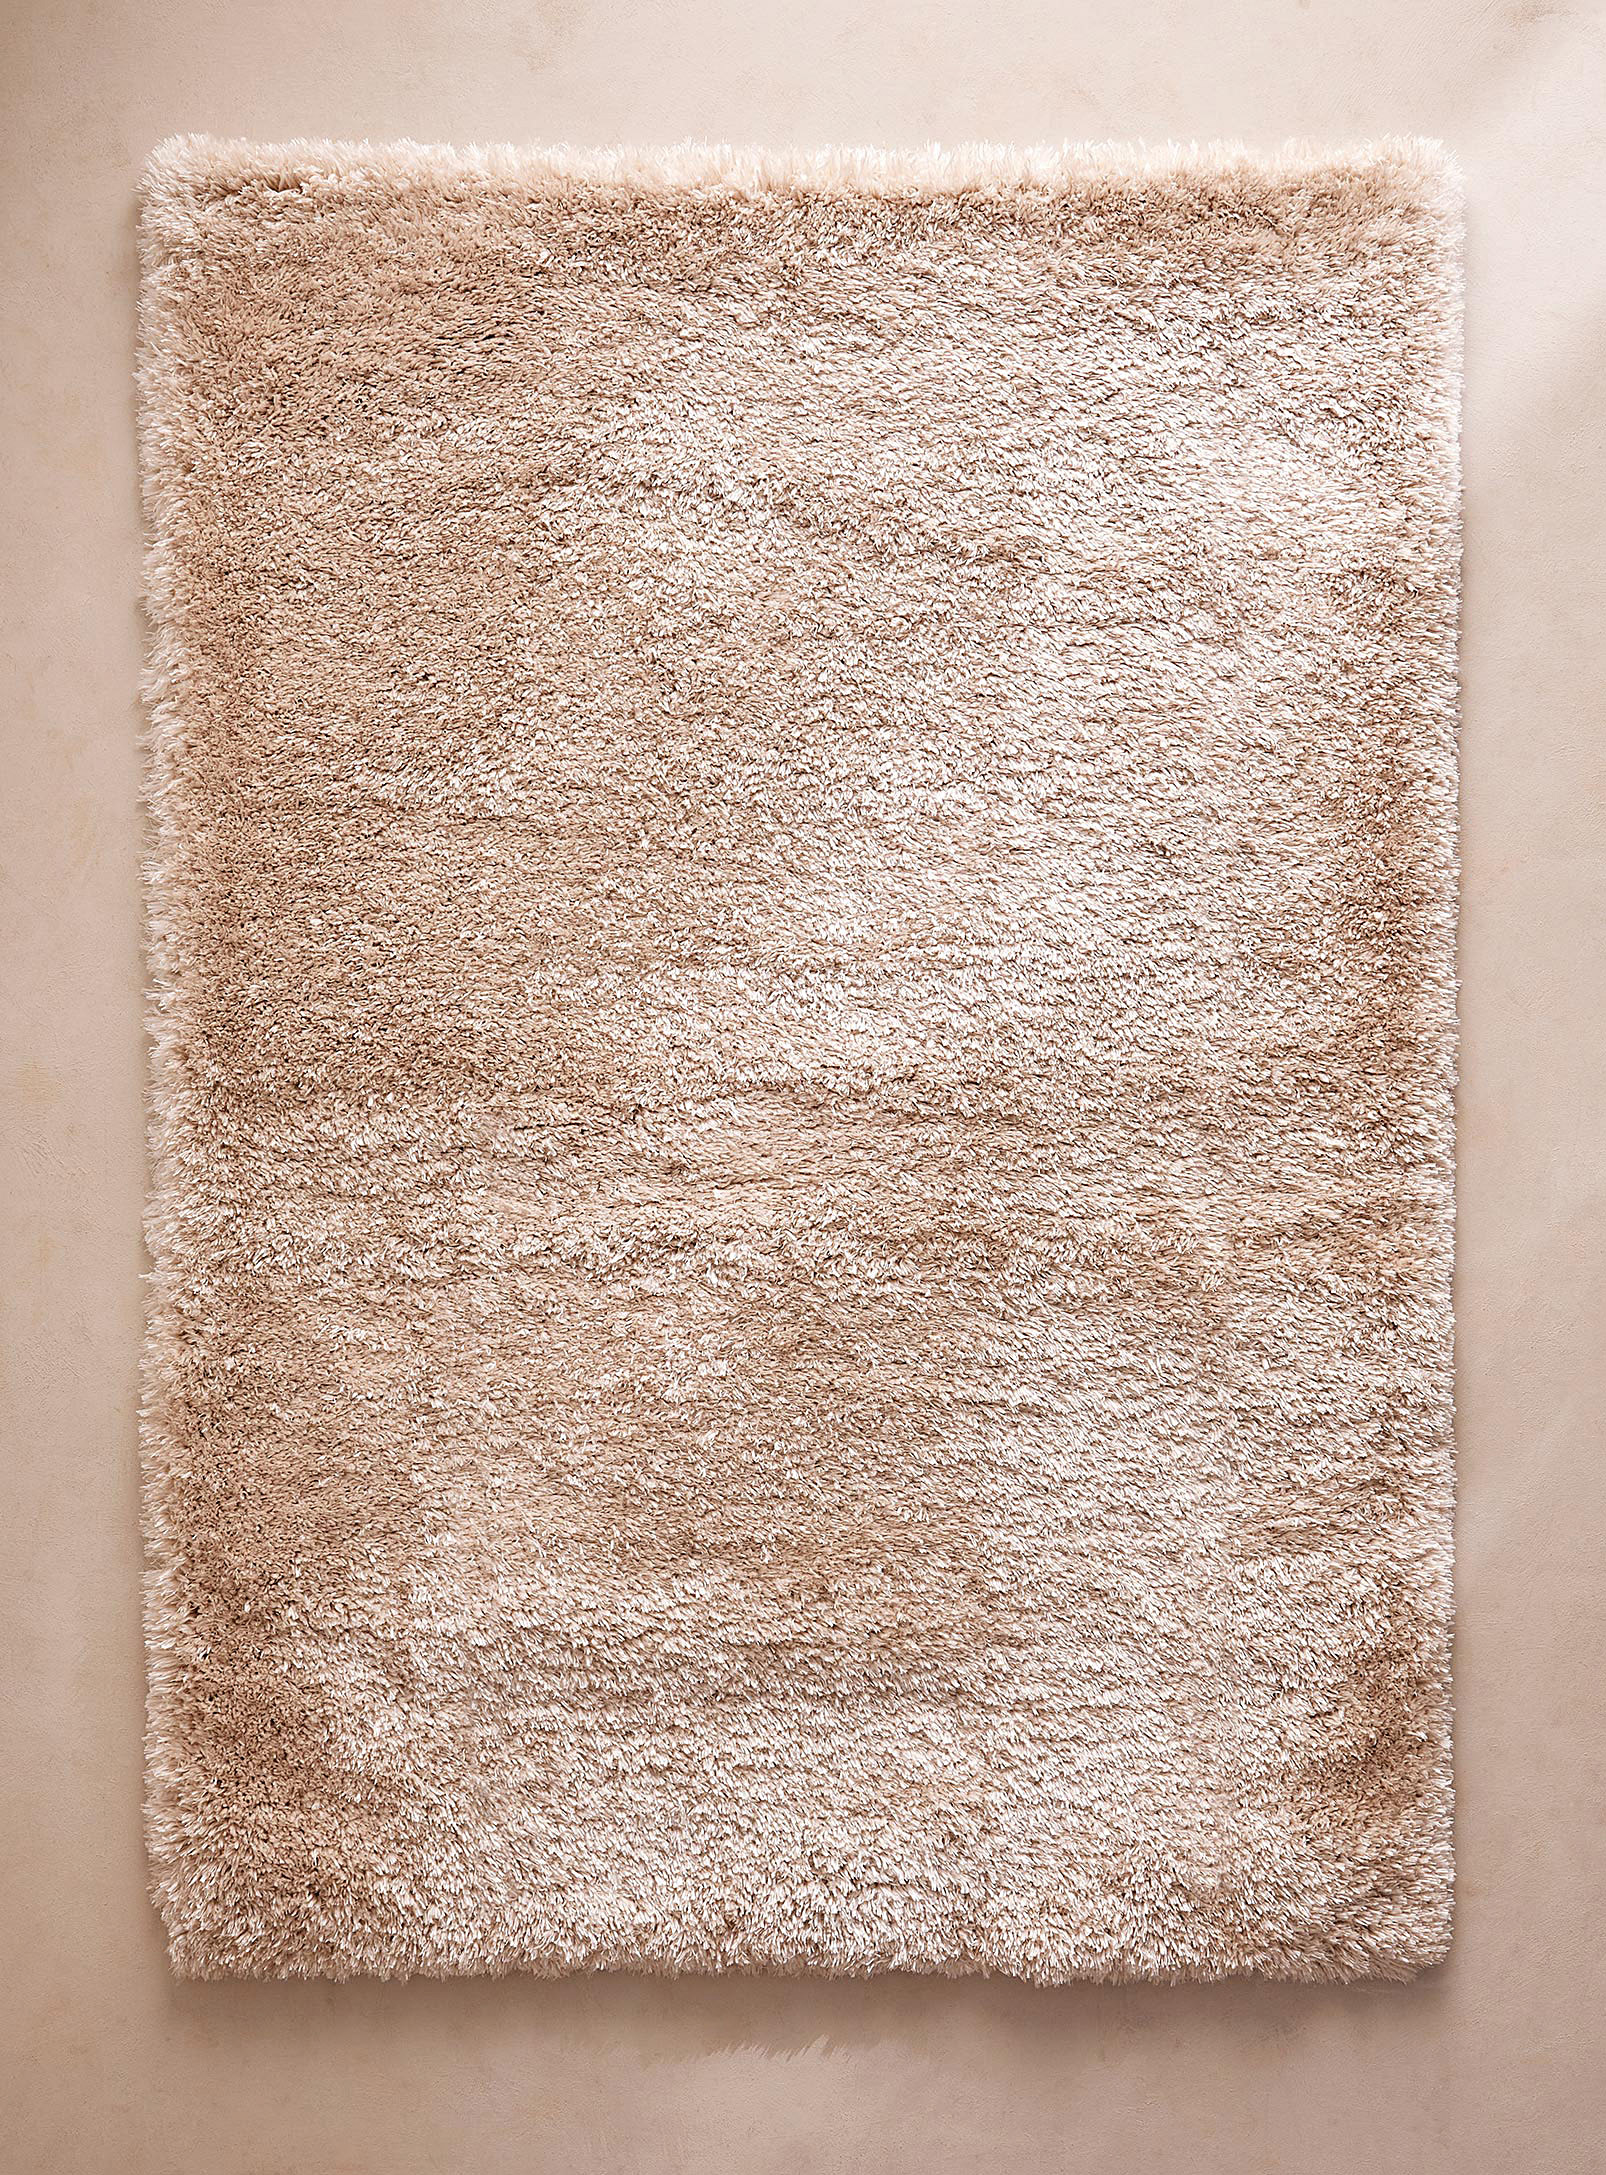 Simons Maison Monochrome Shag Rug See Available Sizes In Cream Beige